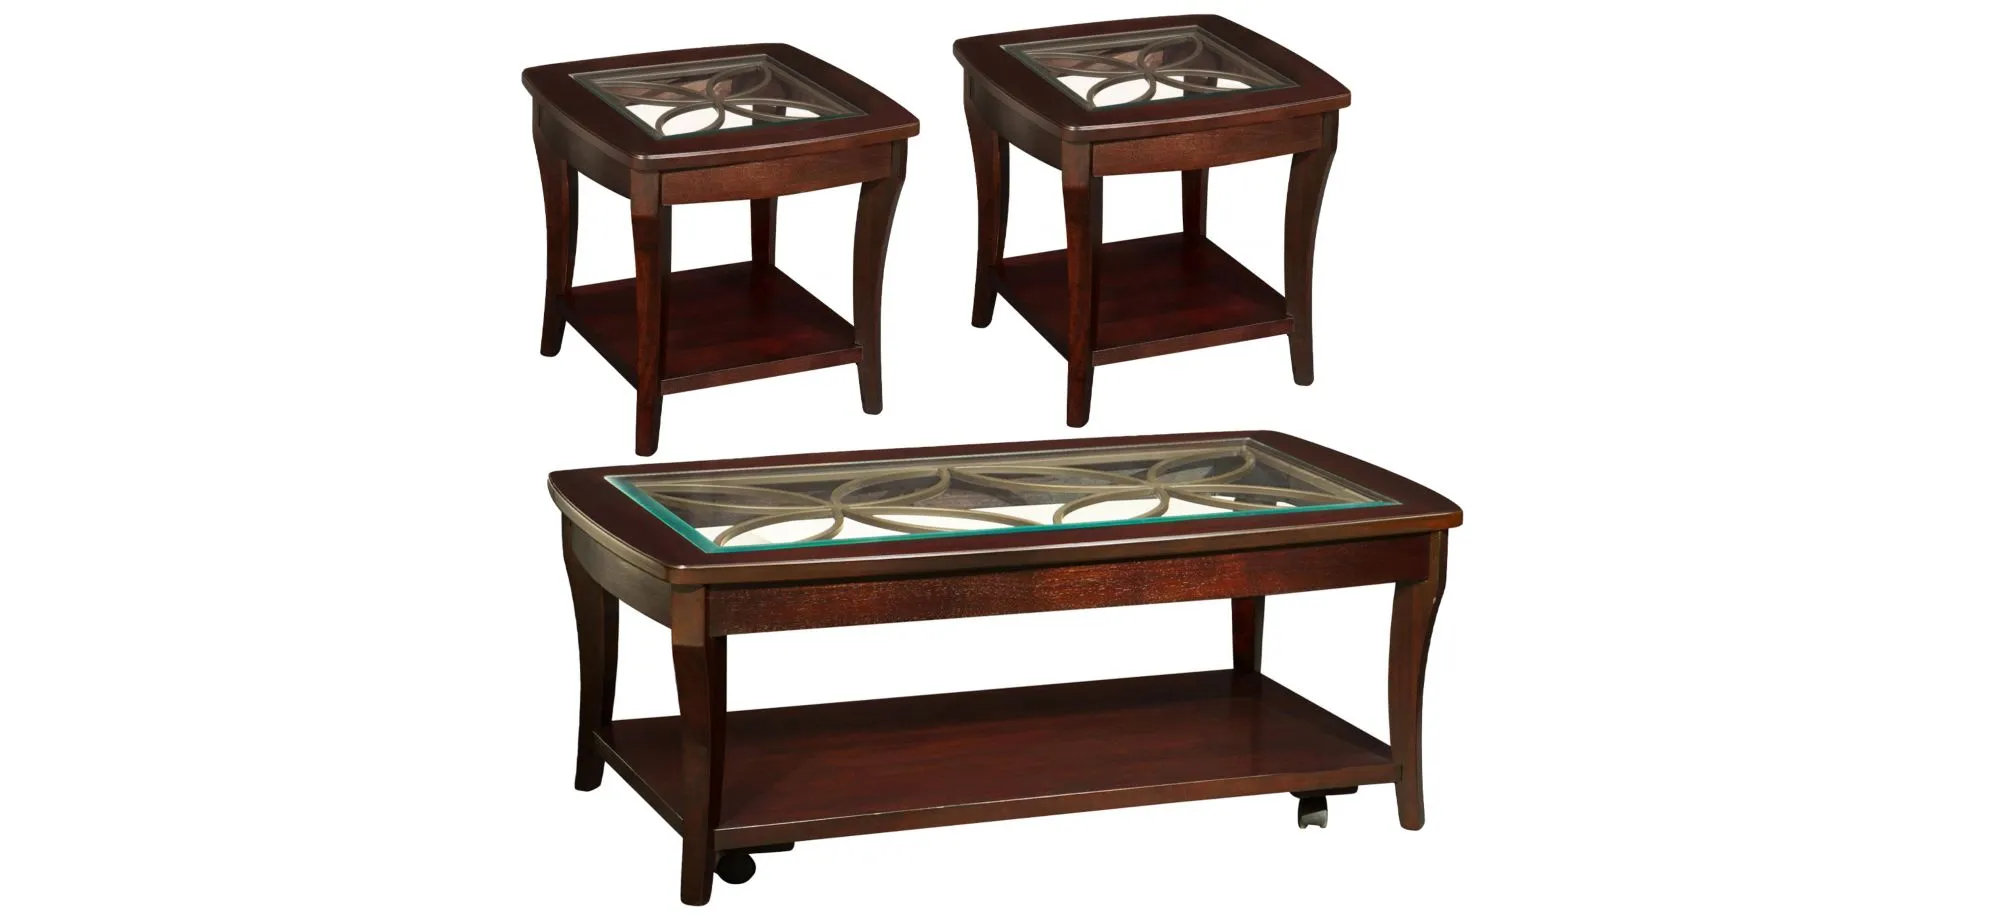 Annandale 3PC Occasional Tables in Dark Mahogany by Riverside Furniture